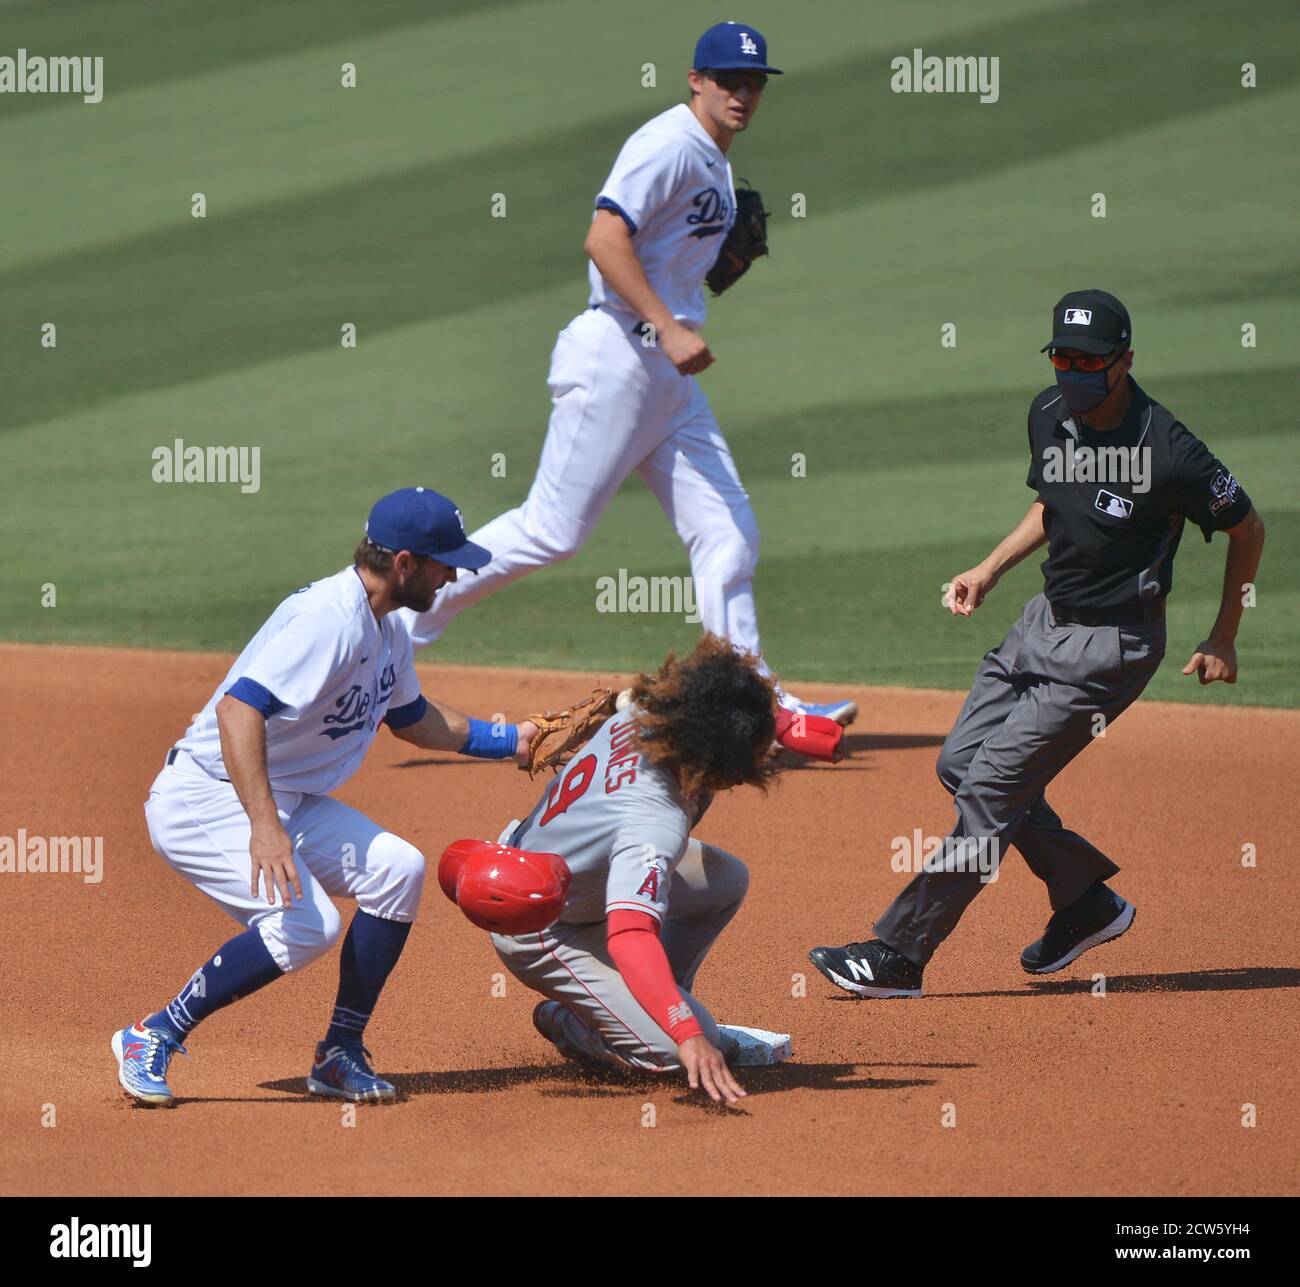 Los Angeles, United States. 27th Sep, 2020. Los Angeles Angels' Jahmai Jones is forced out on the tag by Los Angeles Dodgers' second baseman Chris Taylor but breaks up the double play in the third inning at Dodger Stadium in Los Angeles on Sunday, September 27, 2020. Photo by Jim Ruymen/UPI Credit: UPI/Alamy Live News Stock Photo